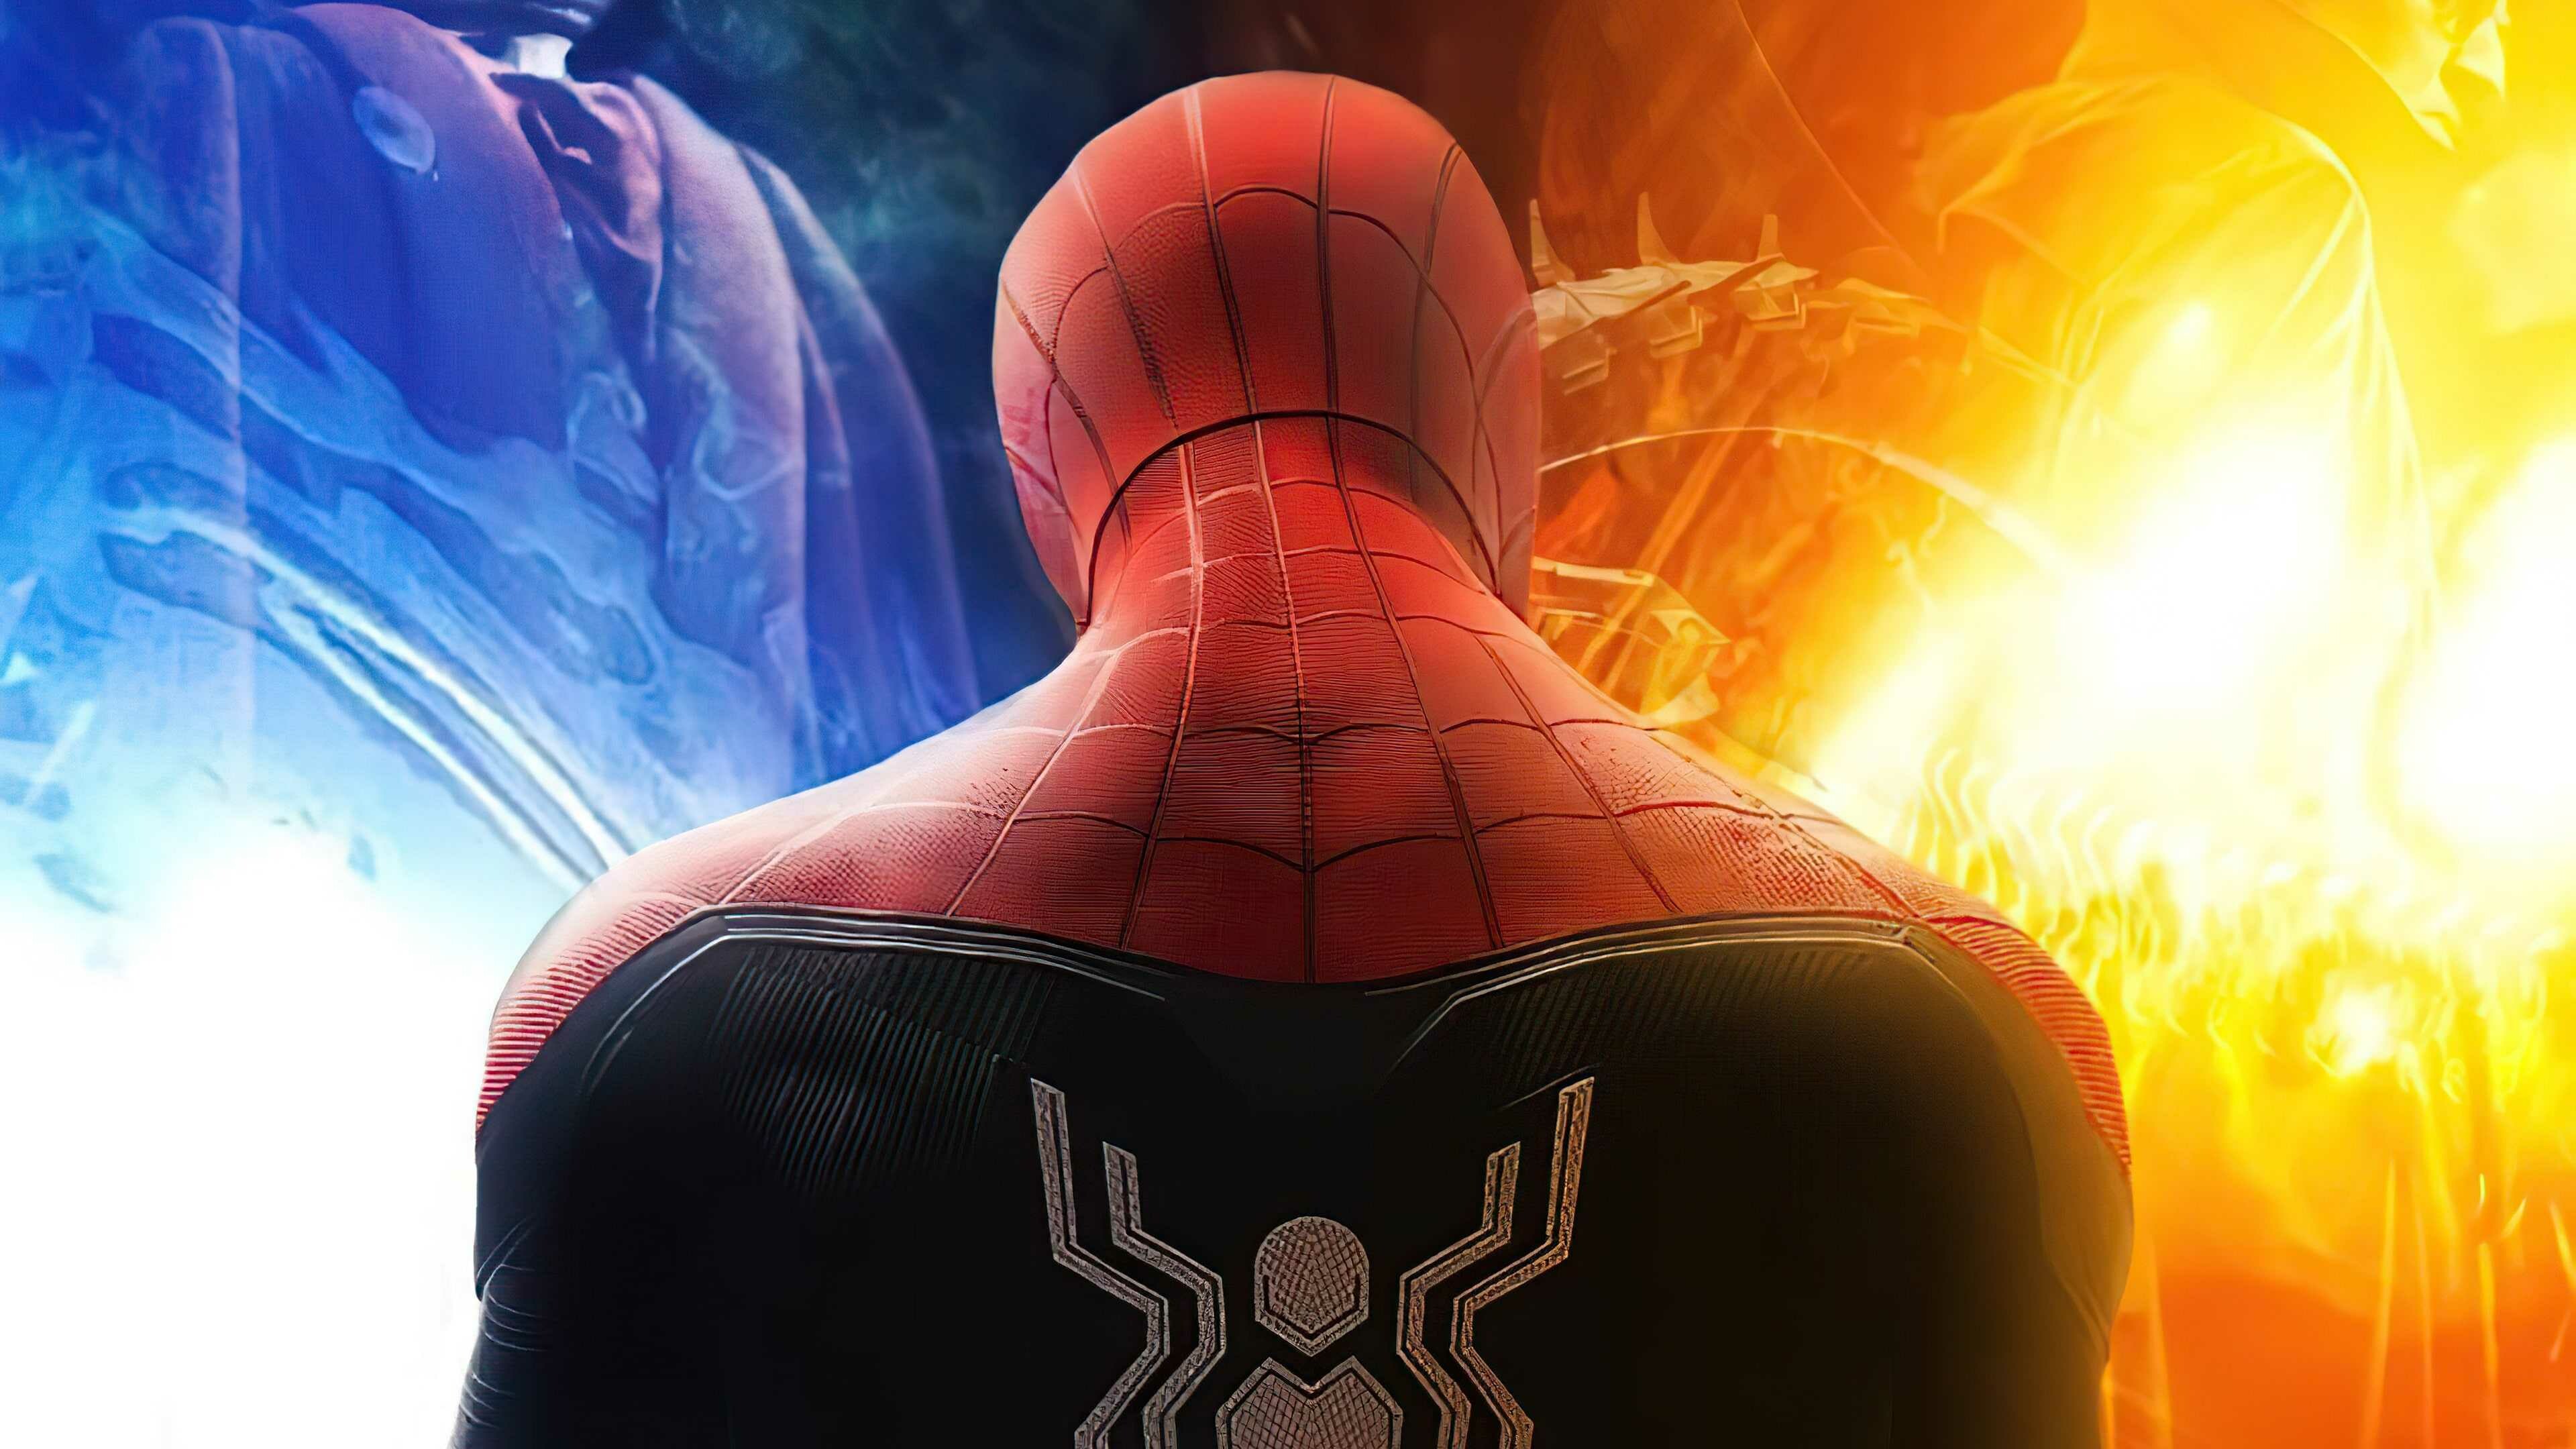 Spider-Man: No Way Home: The sequel to Homecoming (2017) and Far From Home (2019). 3840x2160 4K Wallpaper.